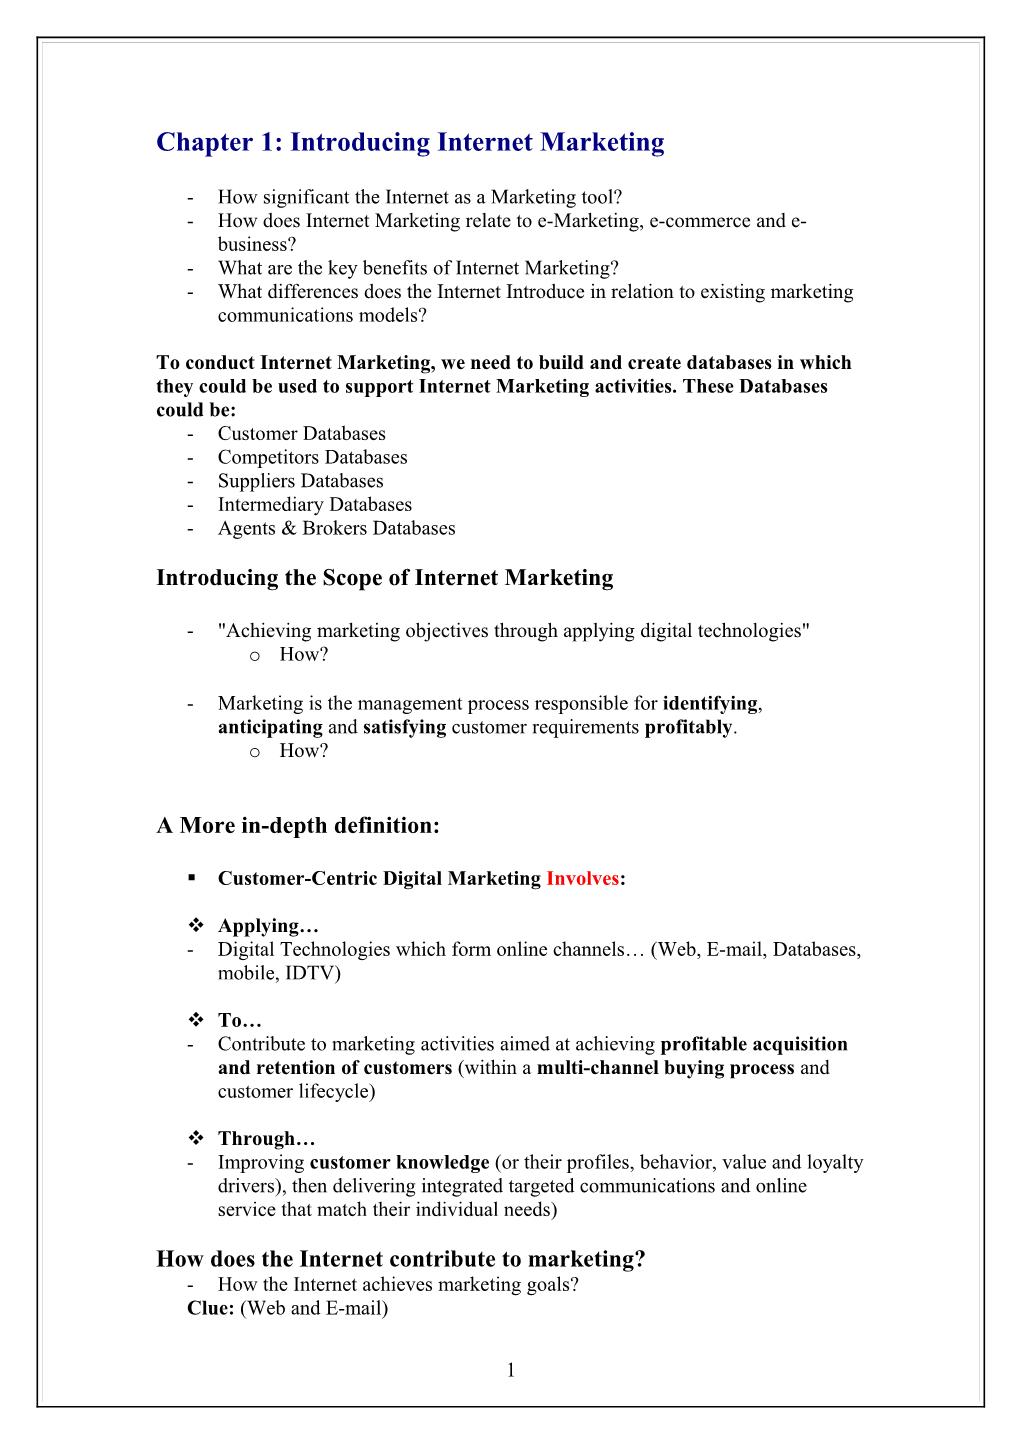 Chapter 1: Introducing Internet Marketing